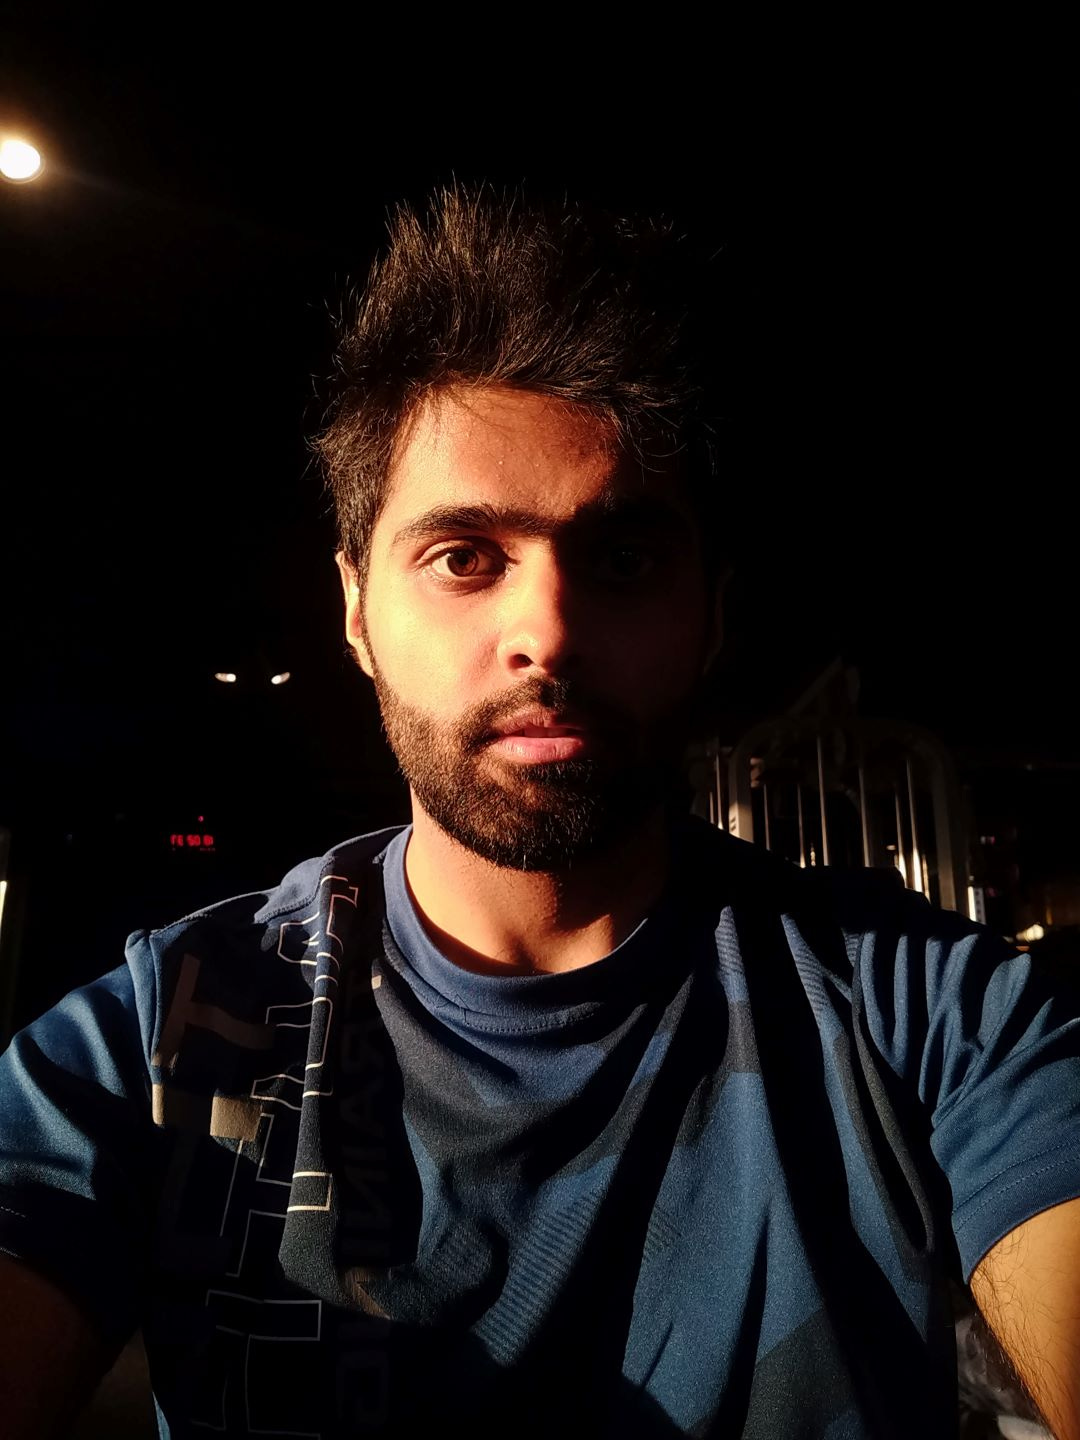 Young Indian man with rough beard staring intensely at the camera lit by harsh shadows